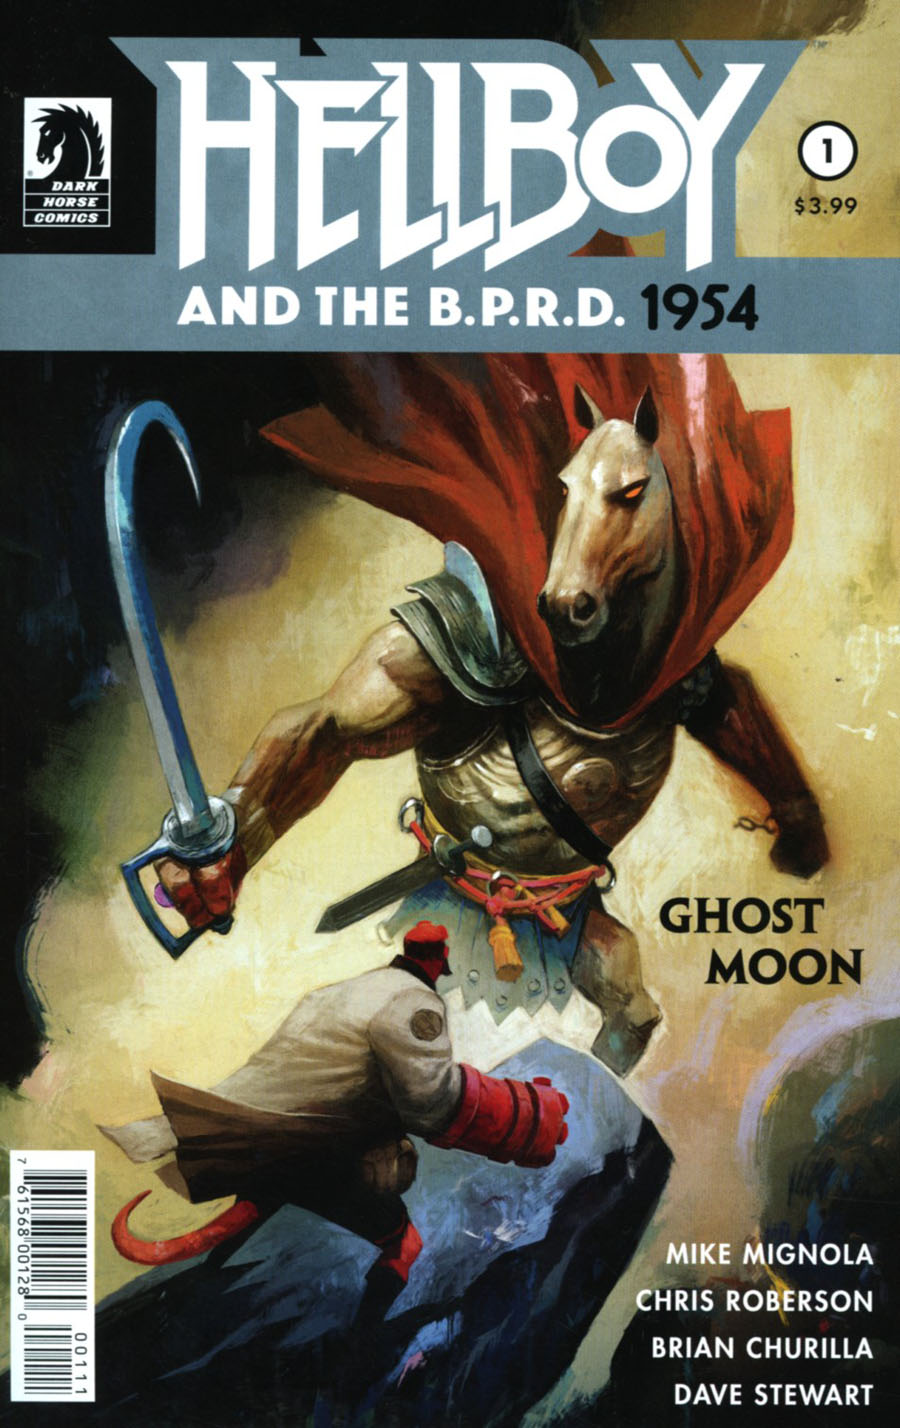 Hellboy And The BPRD 1954 Ghost Moon #1